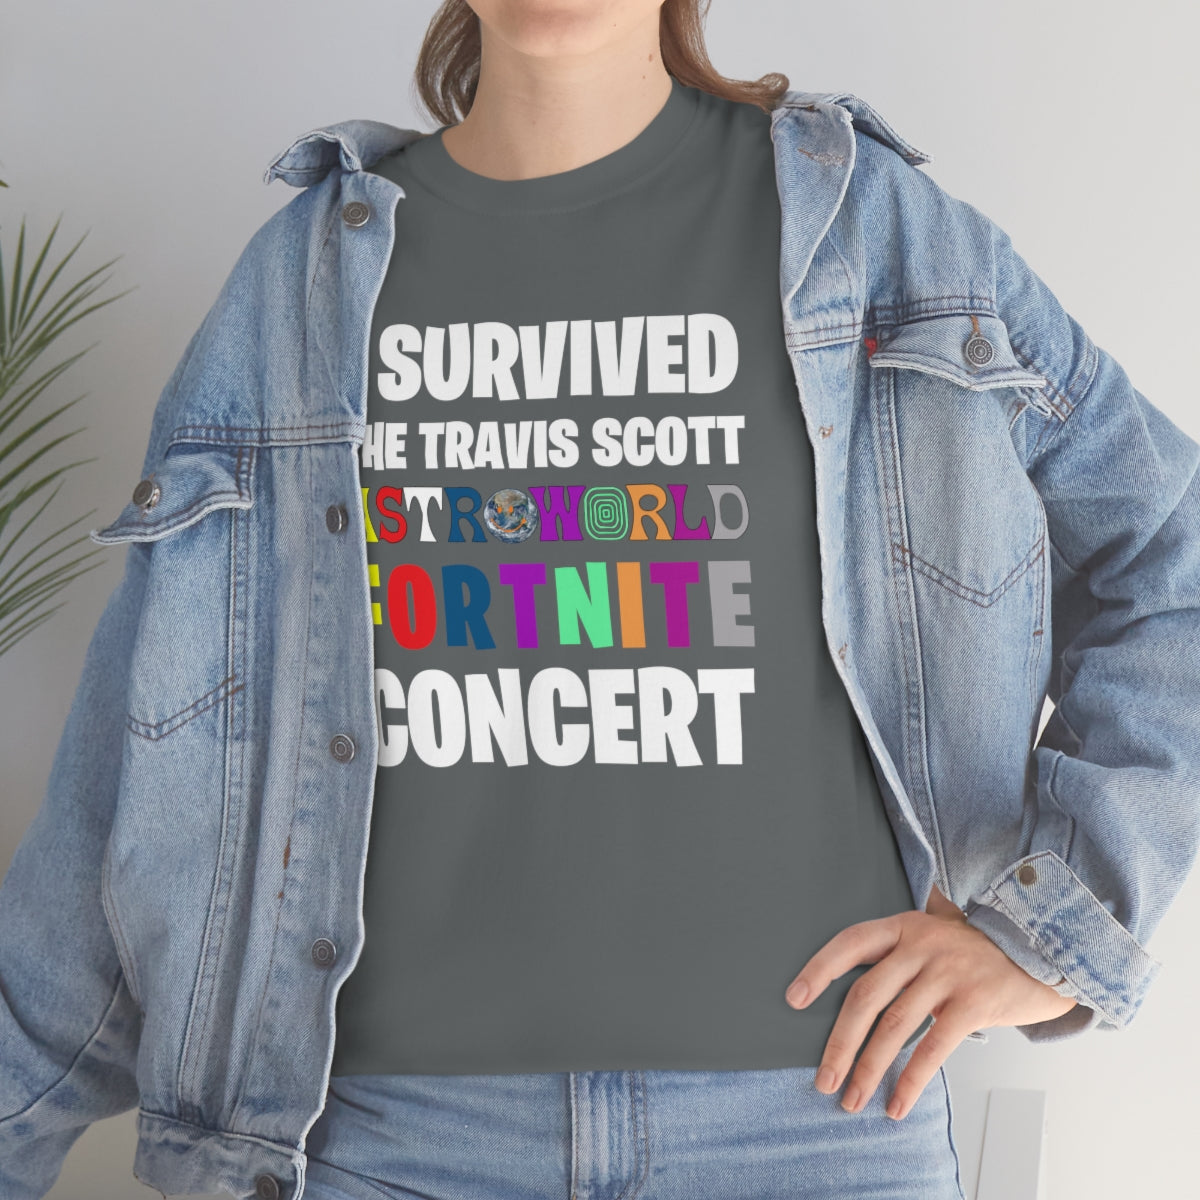 I SURVIVED THE TRAVIS SCOTT FORTNITE CONCERT - Unisex Heavy Cotton Tee - All Colors